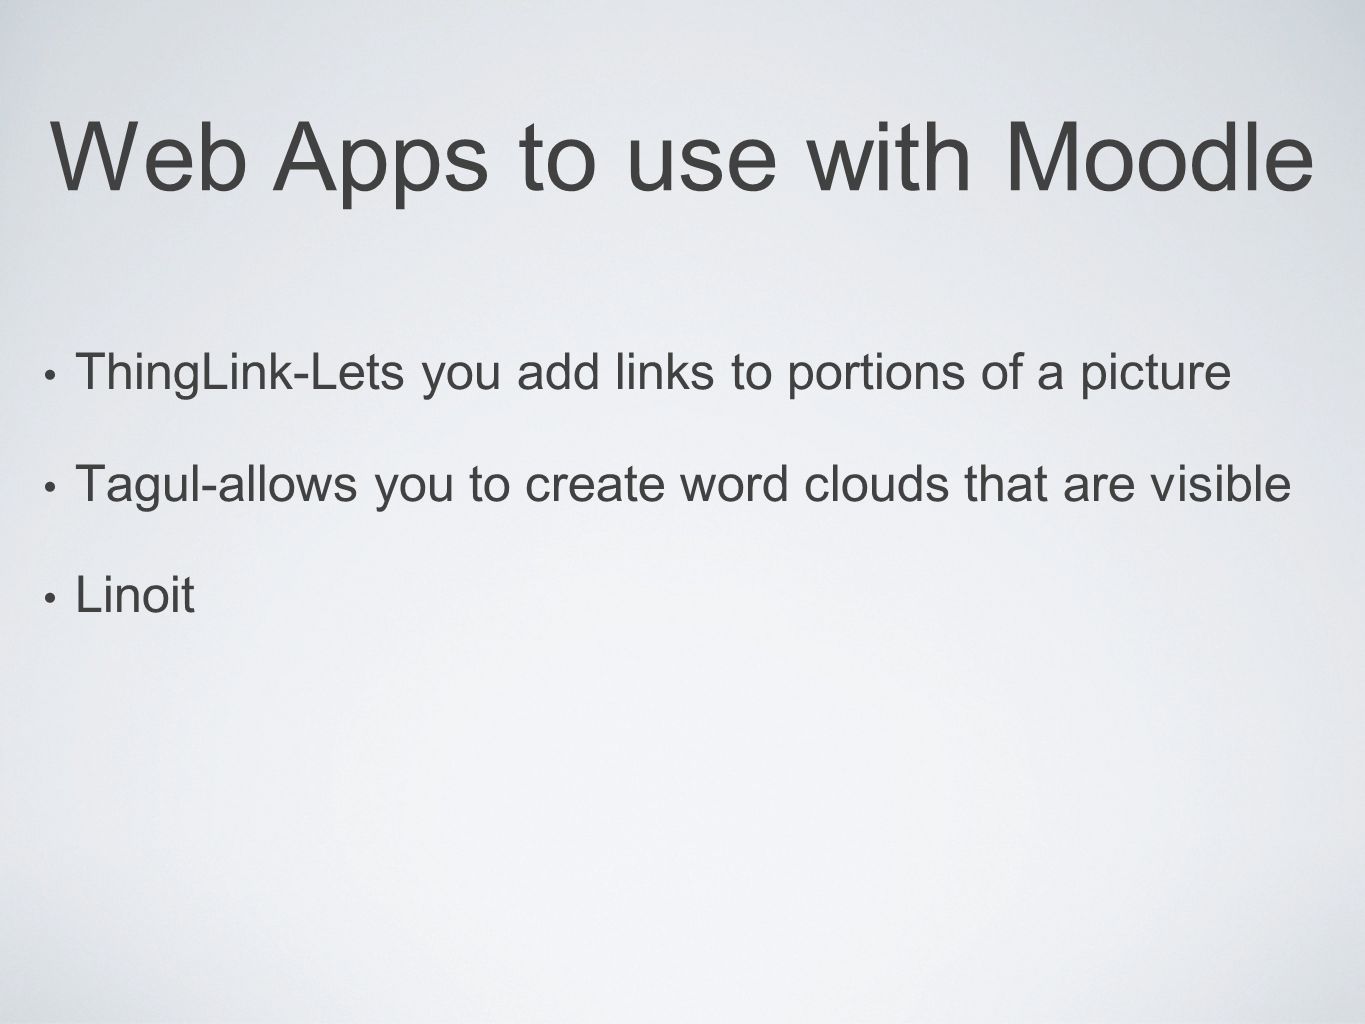 Web Apps to use with Moodle ThingLink-Lets you add links to portions of a picture Tagul-allows you to create word clouds that are visible Linoit